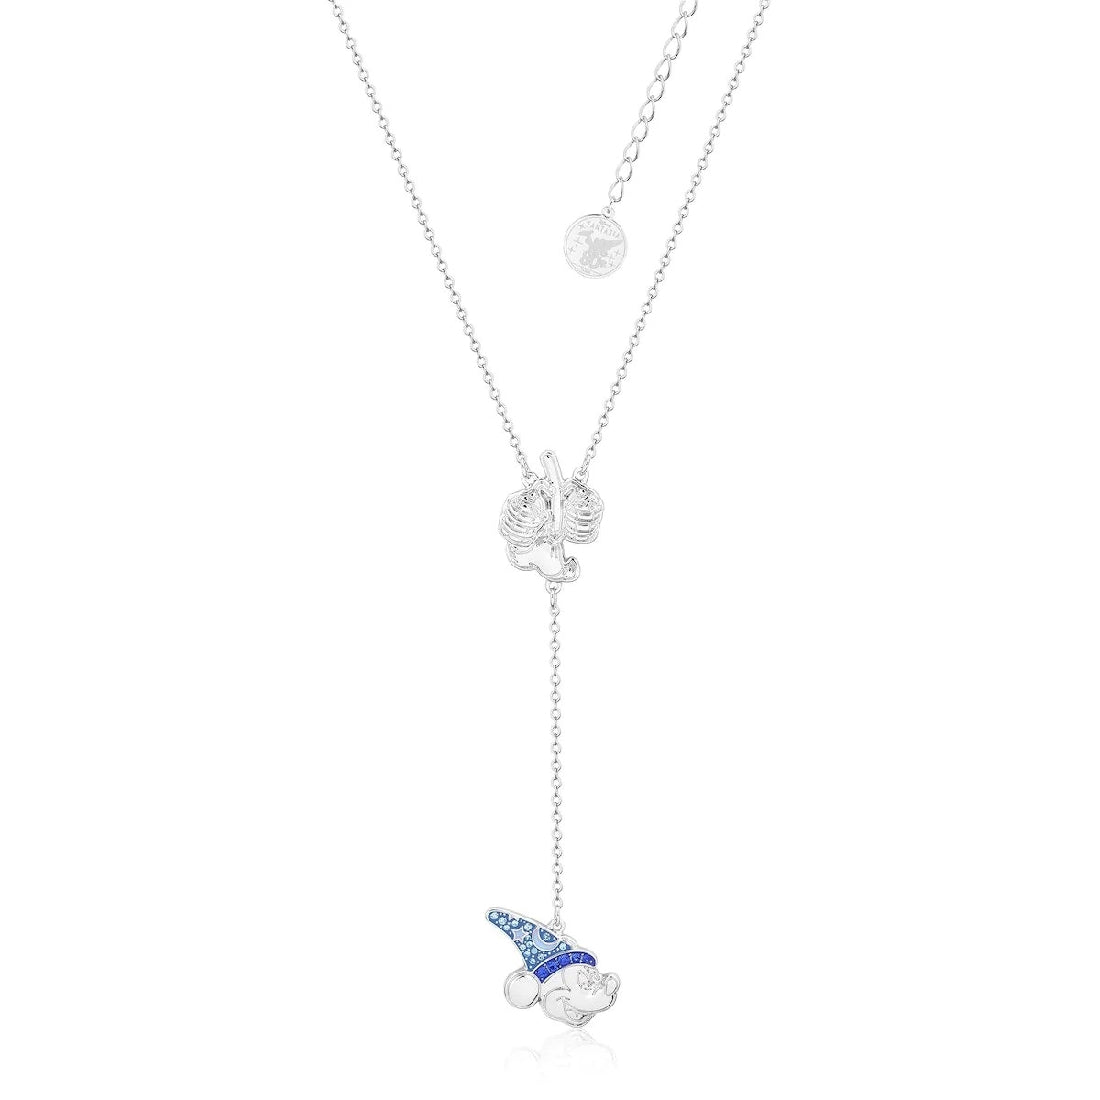 DISNEY COUTURE KINGDOM FANTASIA SORCERERS APPRENTICE MICKEY MOUSE & MOP LARIAT NECKLACE WHITE GOLD PLATED